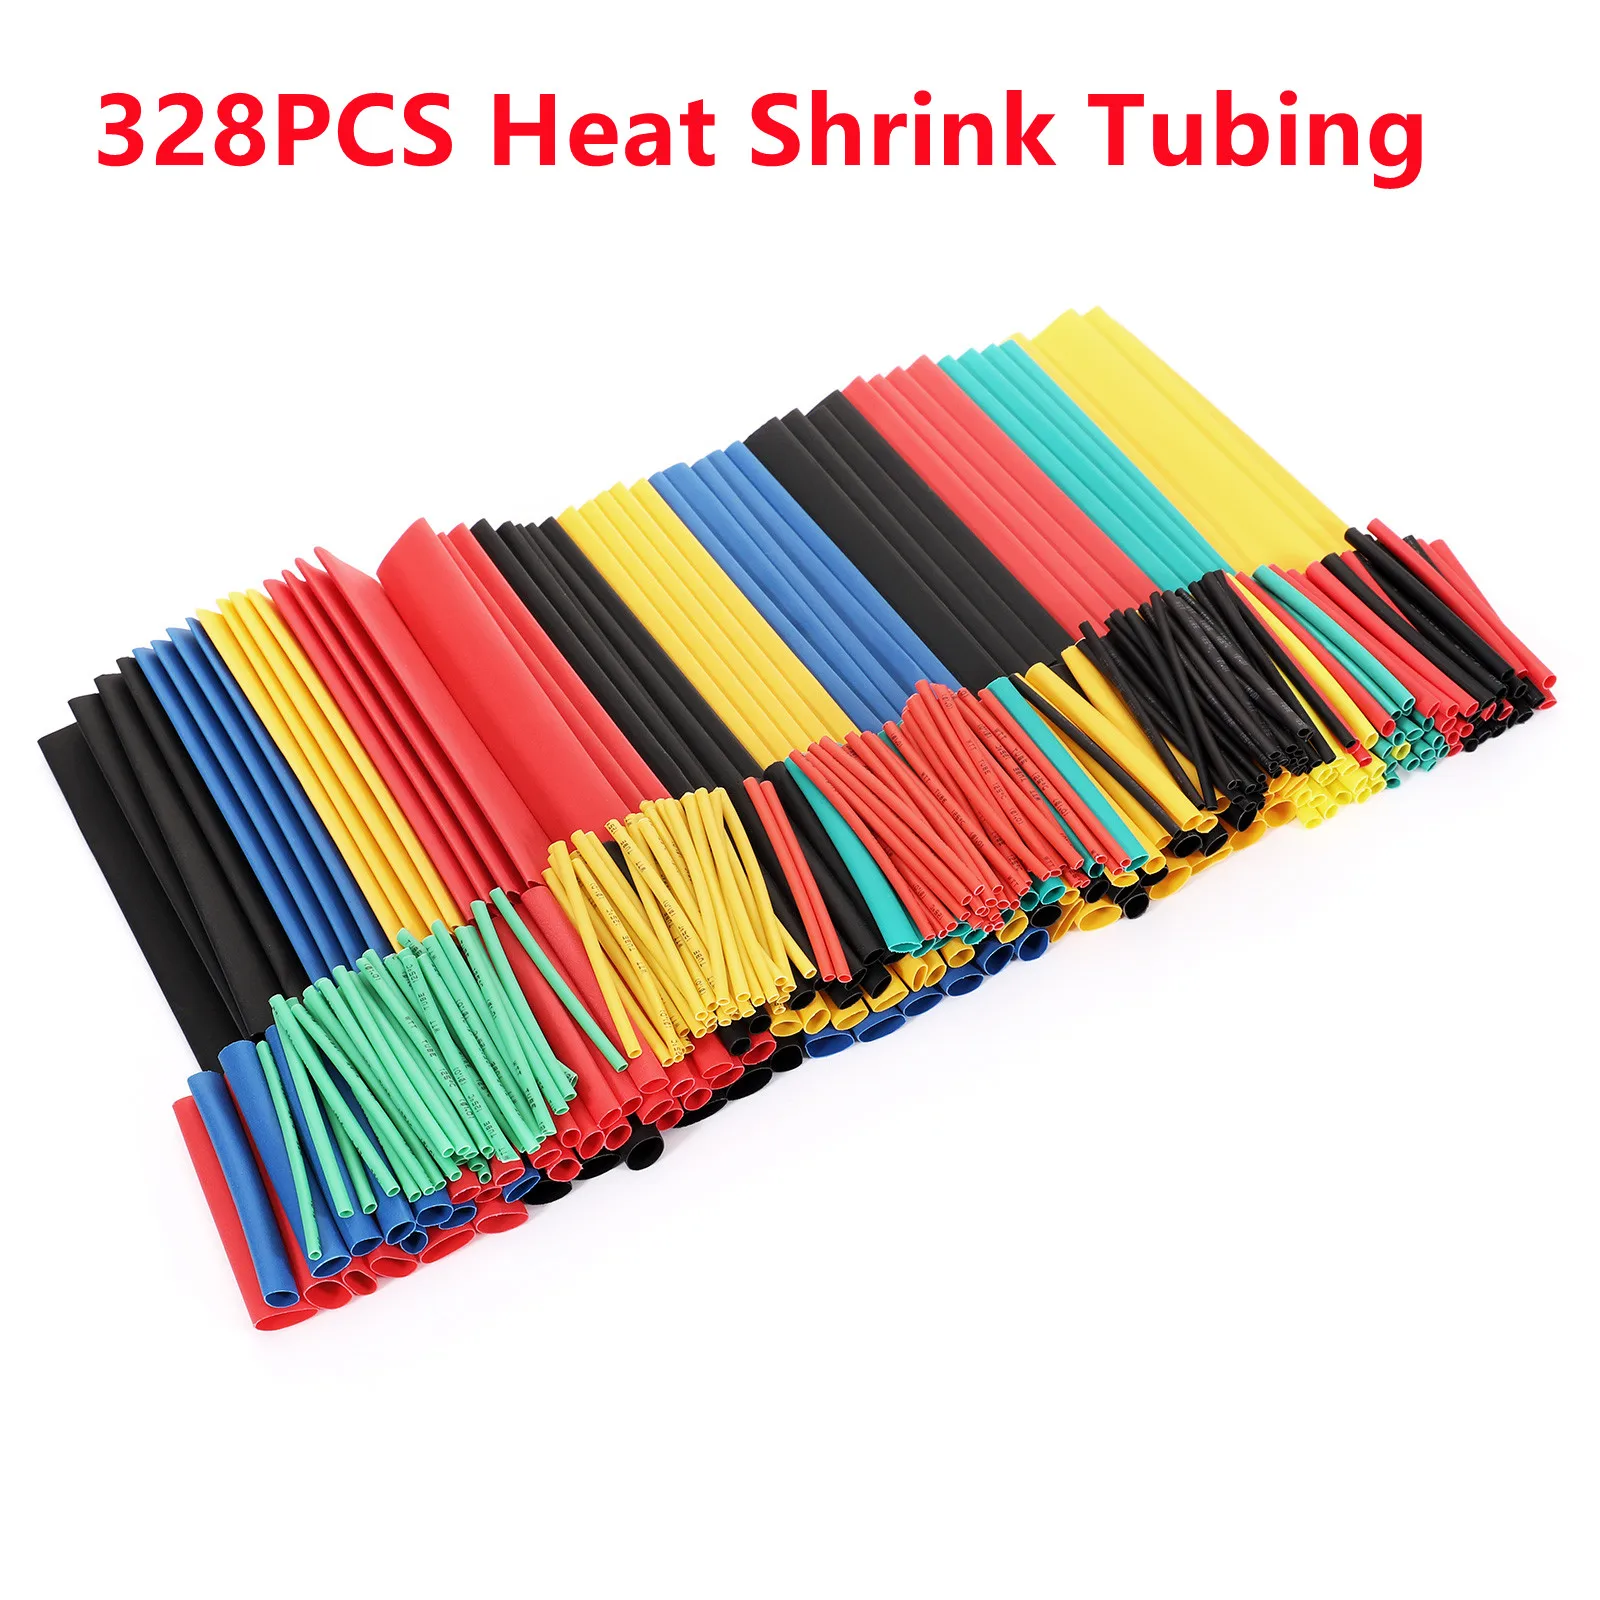 

328pcs Heat Shrink Tube Insulation Shrinkable Tube Assortment Electronic Polyolefin Wire Cable Sleeve Kit Waterproof Pipe Sleeve